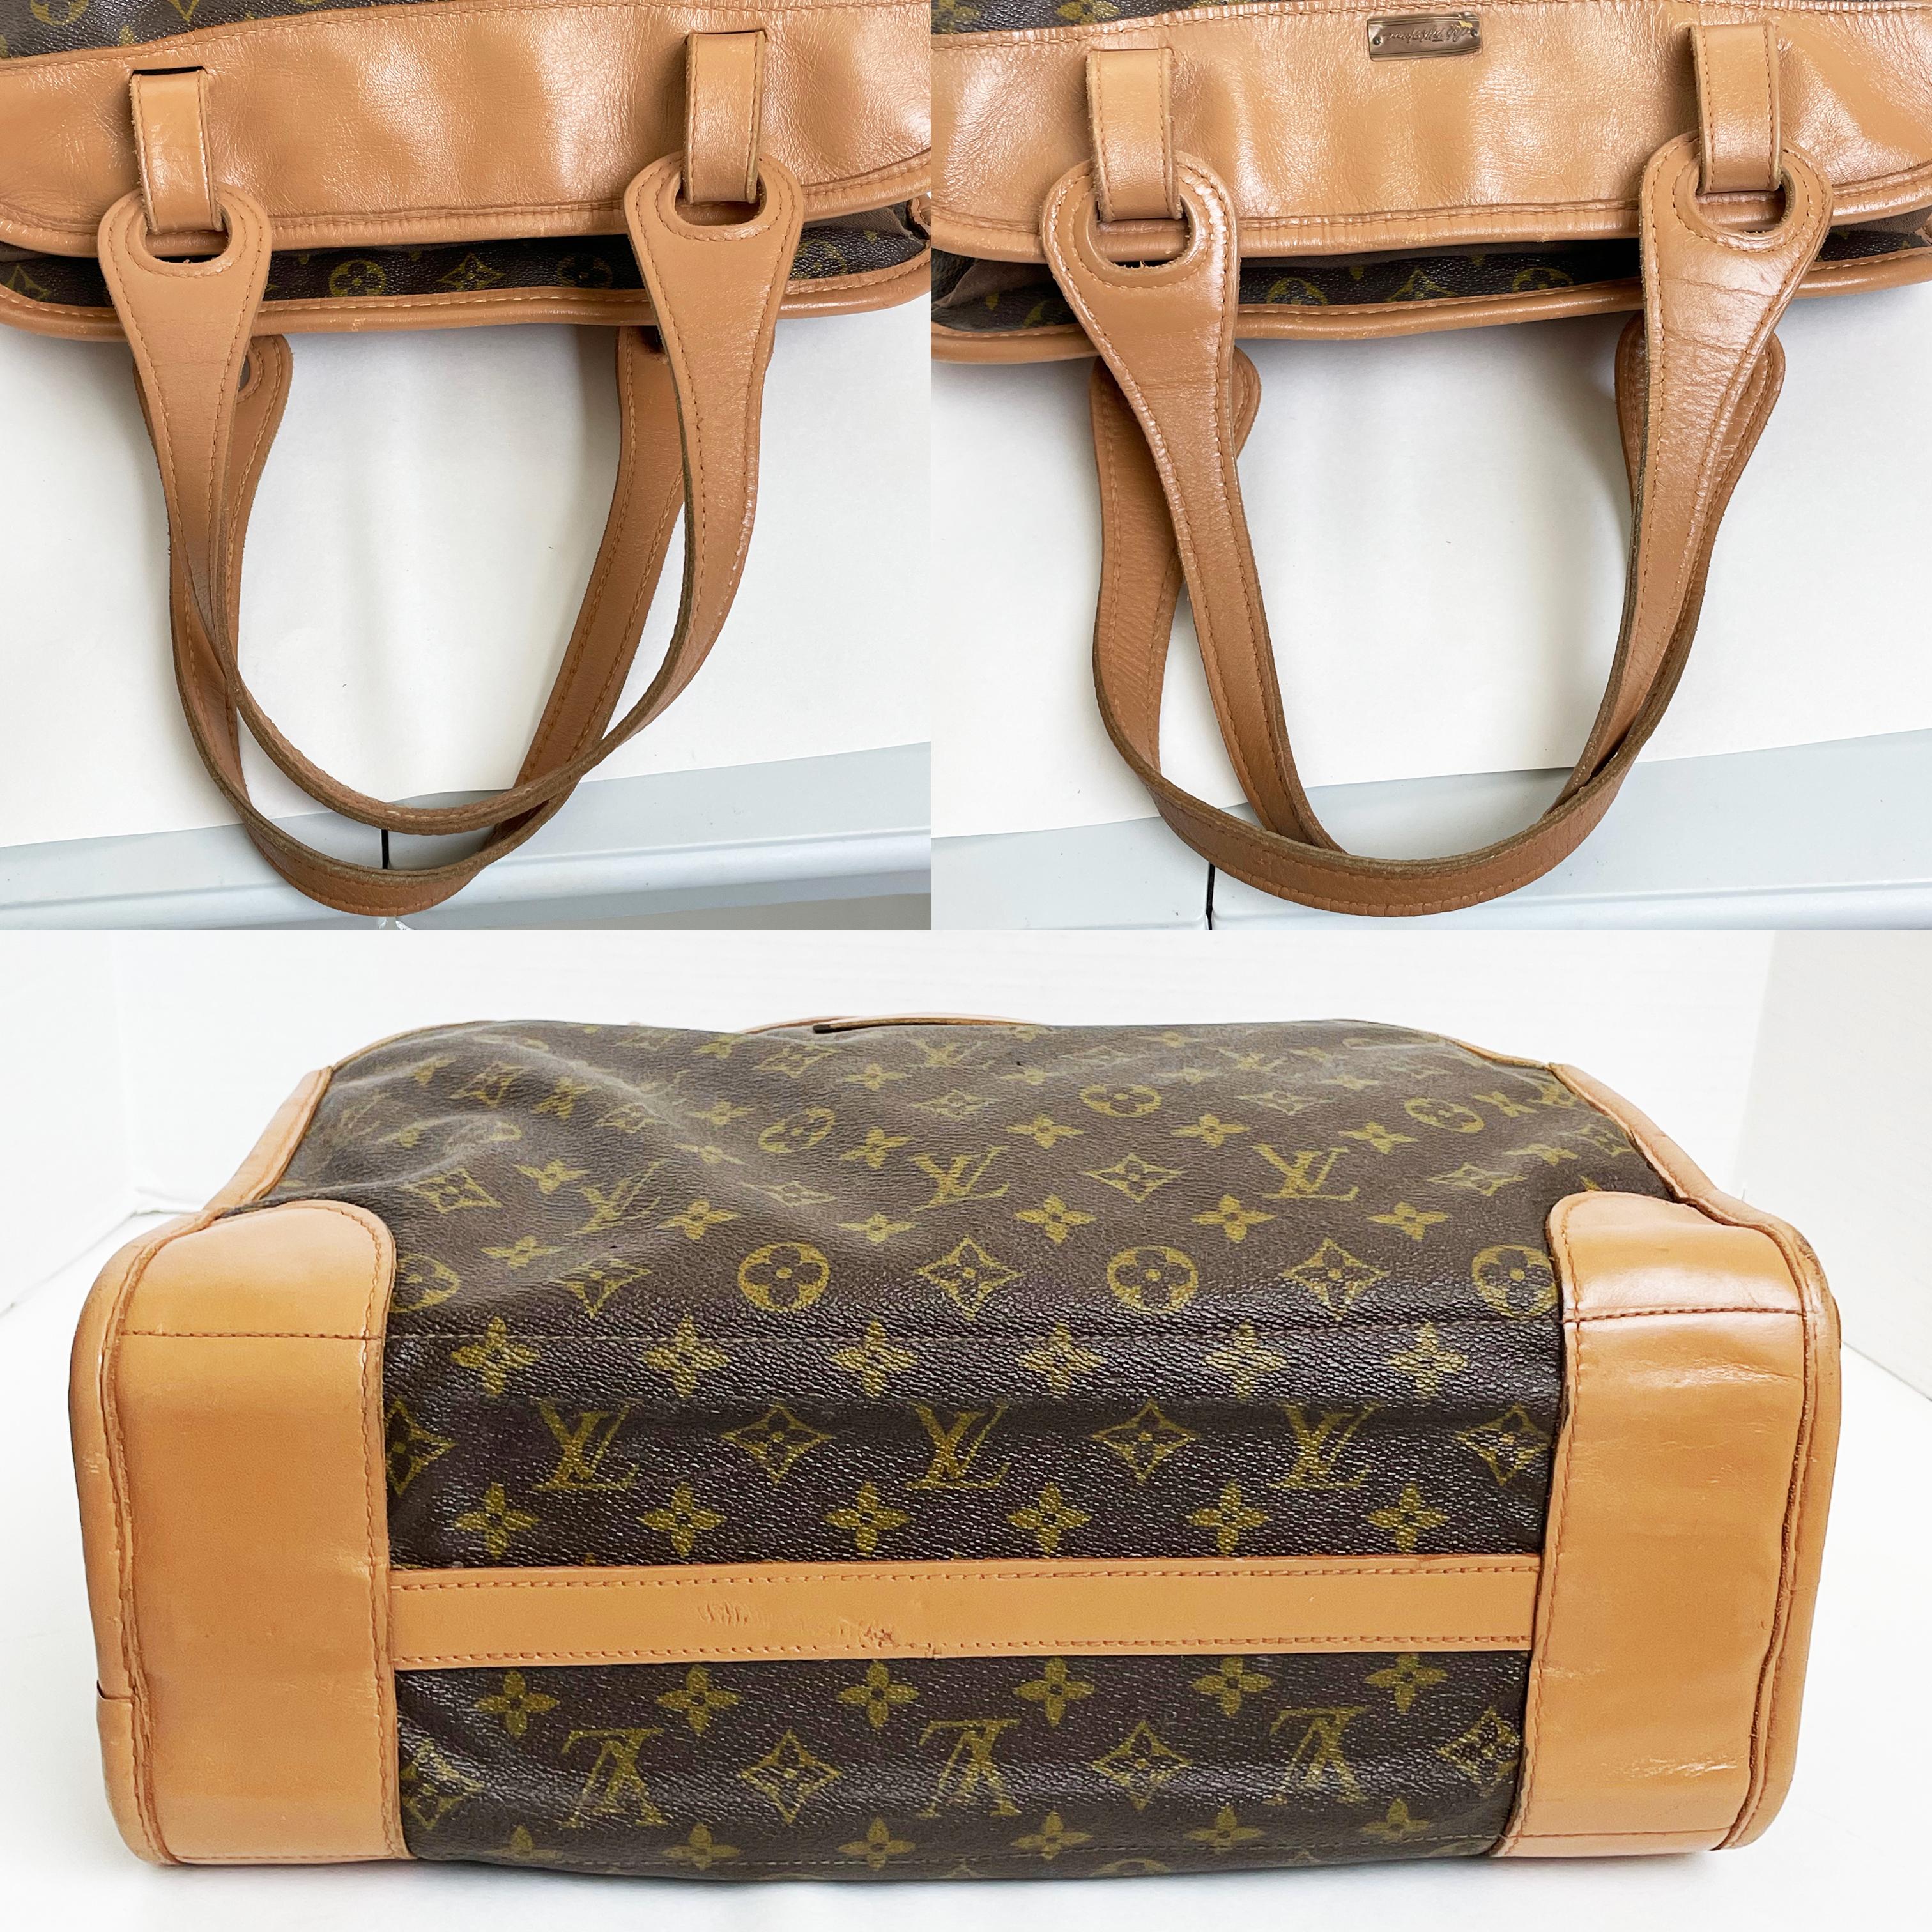 Louis Vuitton Tote Bag Travel Carry On French Luggage Co Saks 5th Ave Vintage  im Angebot 9